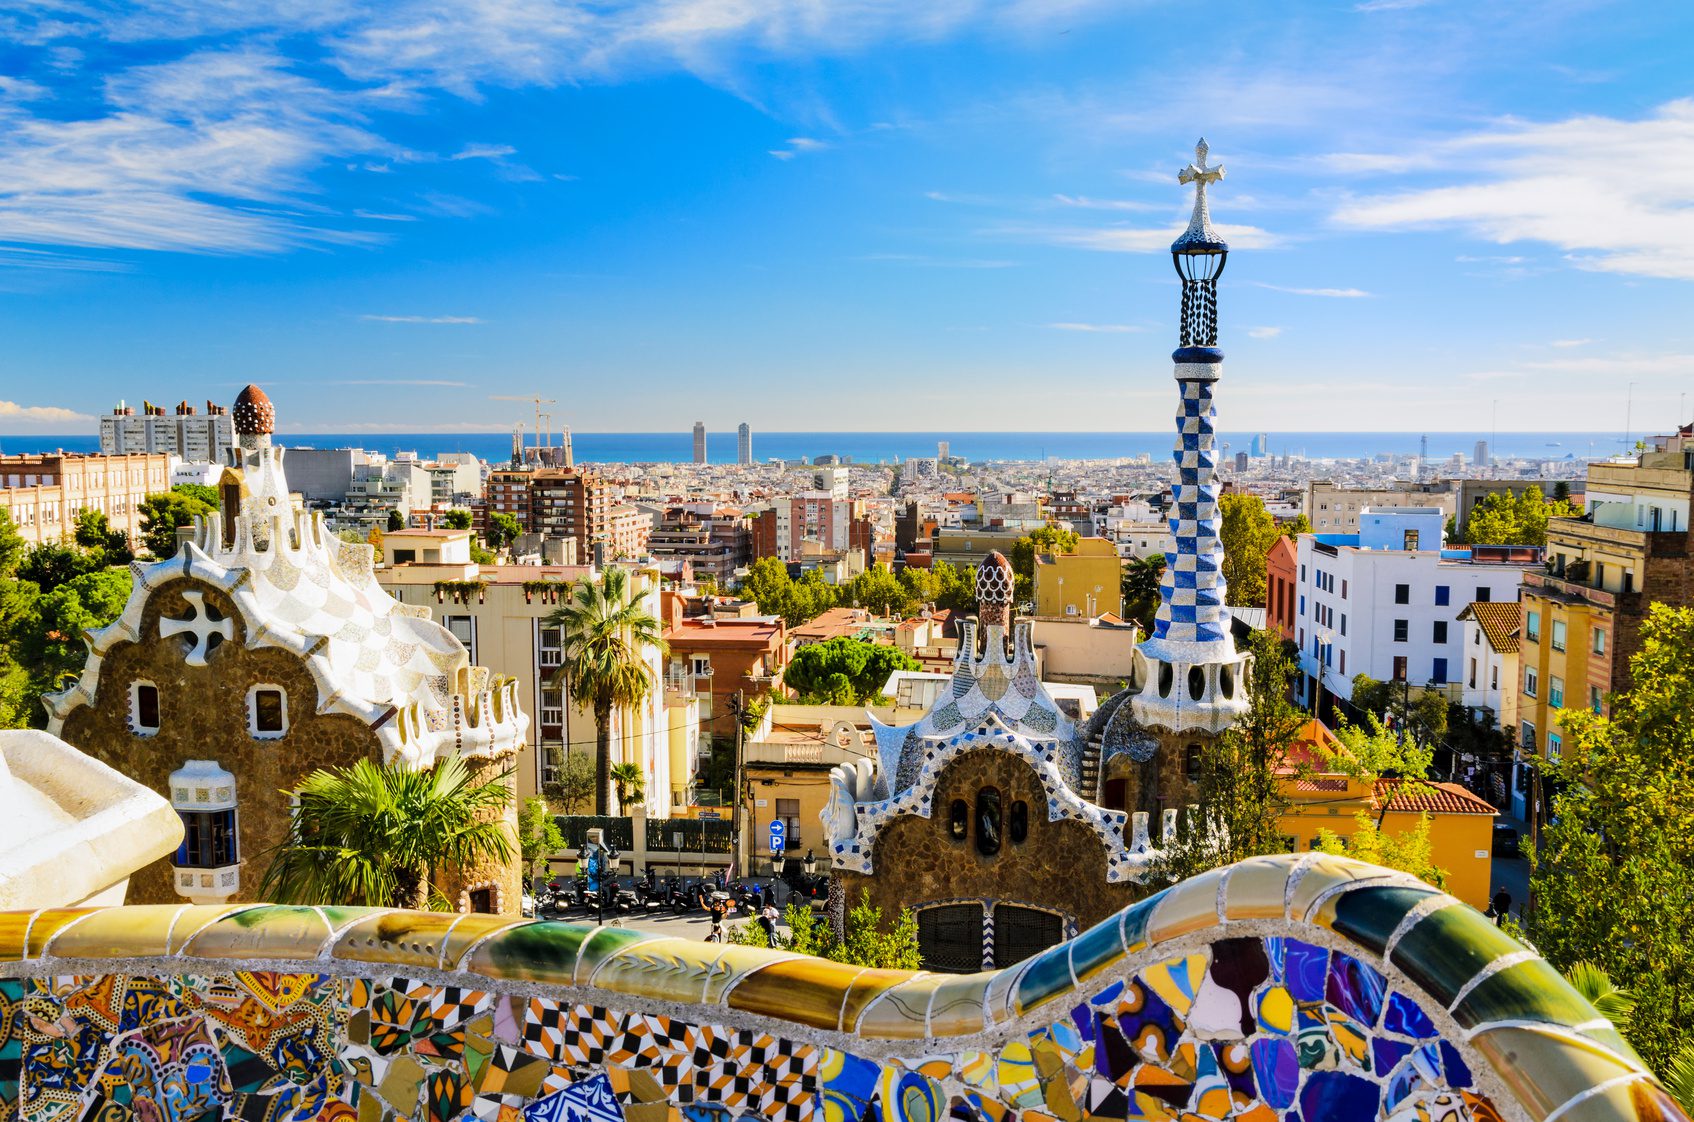 Park Guell Barcelone espagne